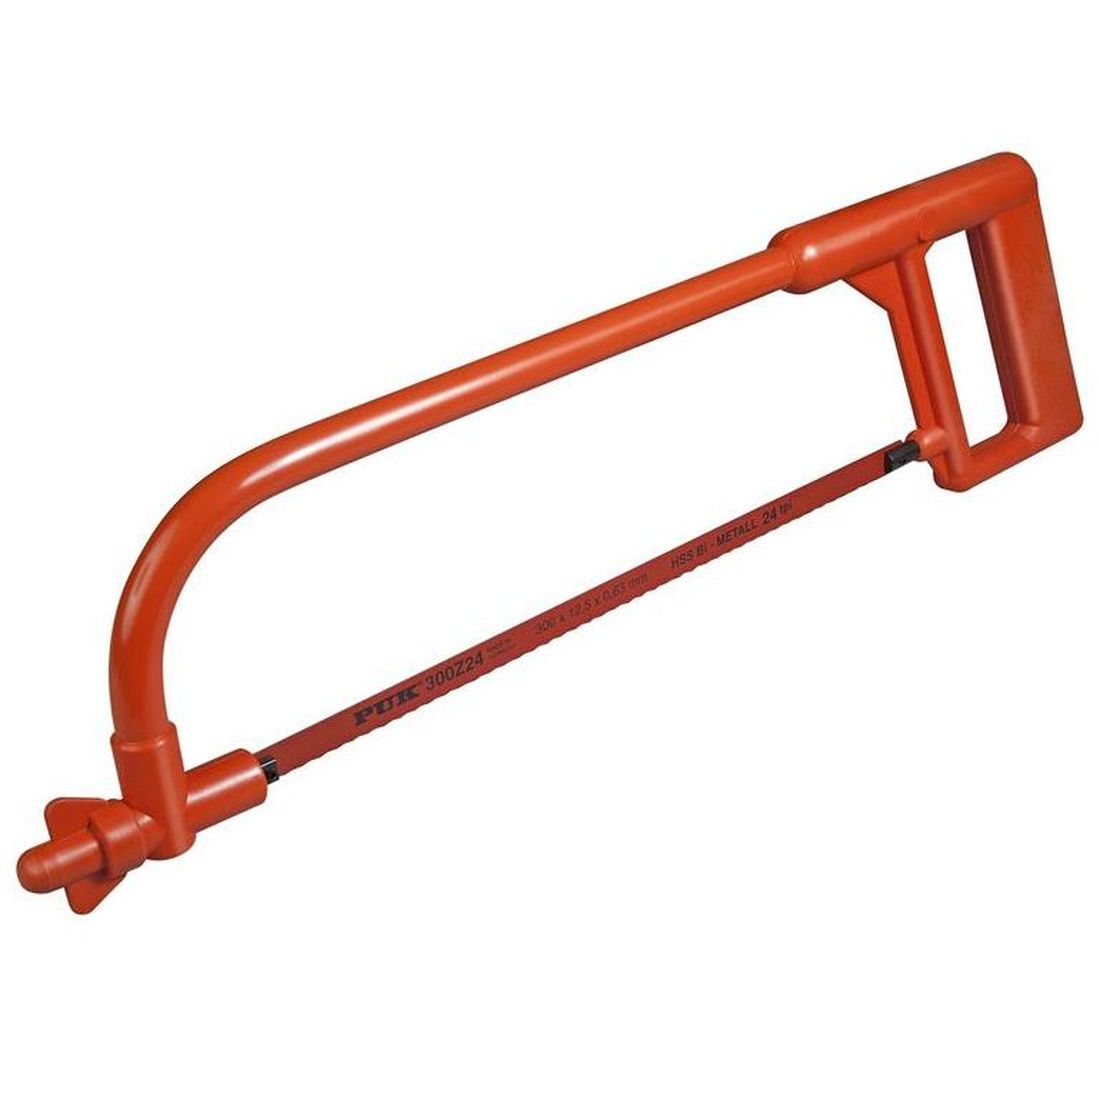 ITL Insulated Hacksaw 300mm (12in)              